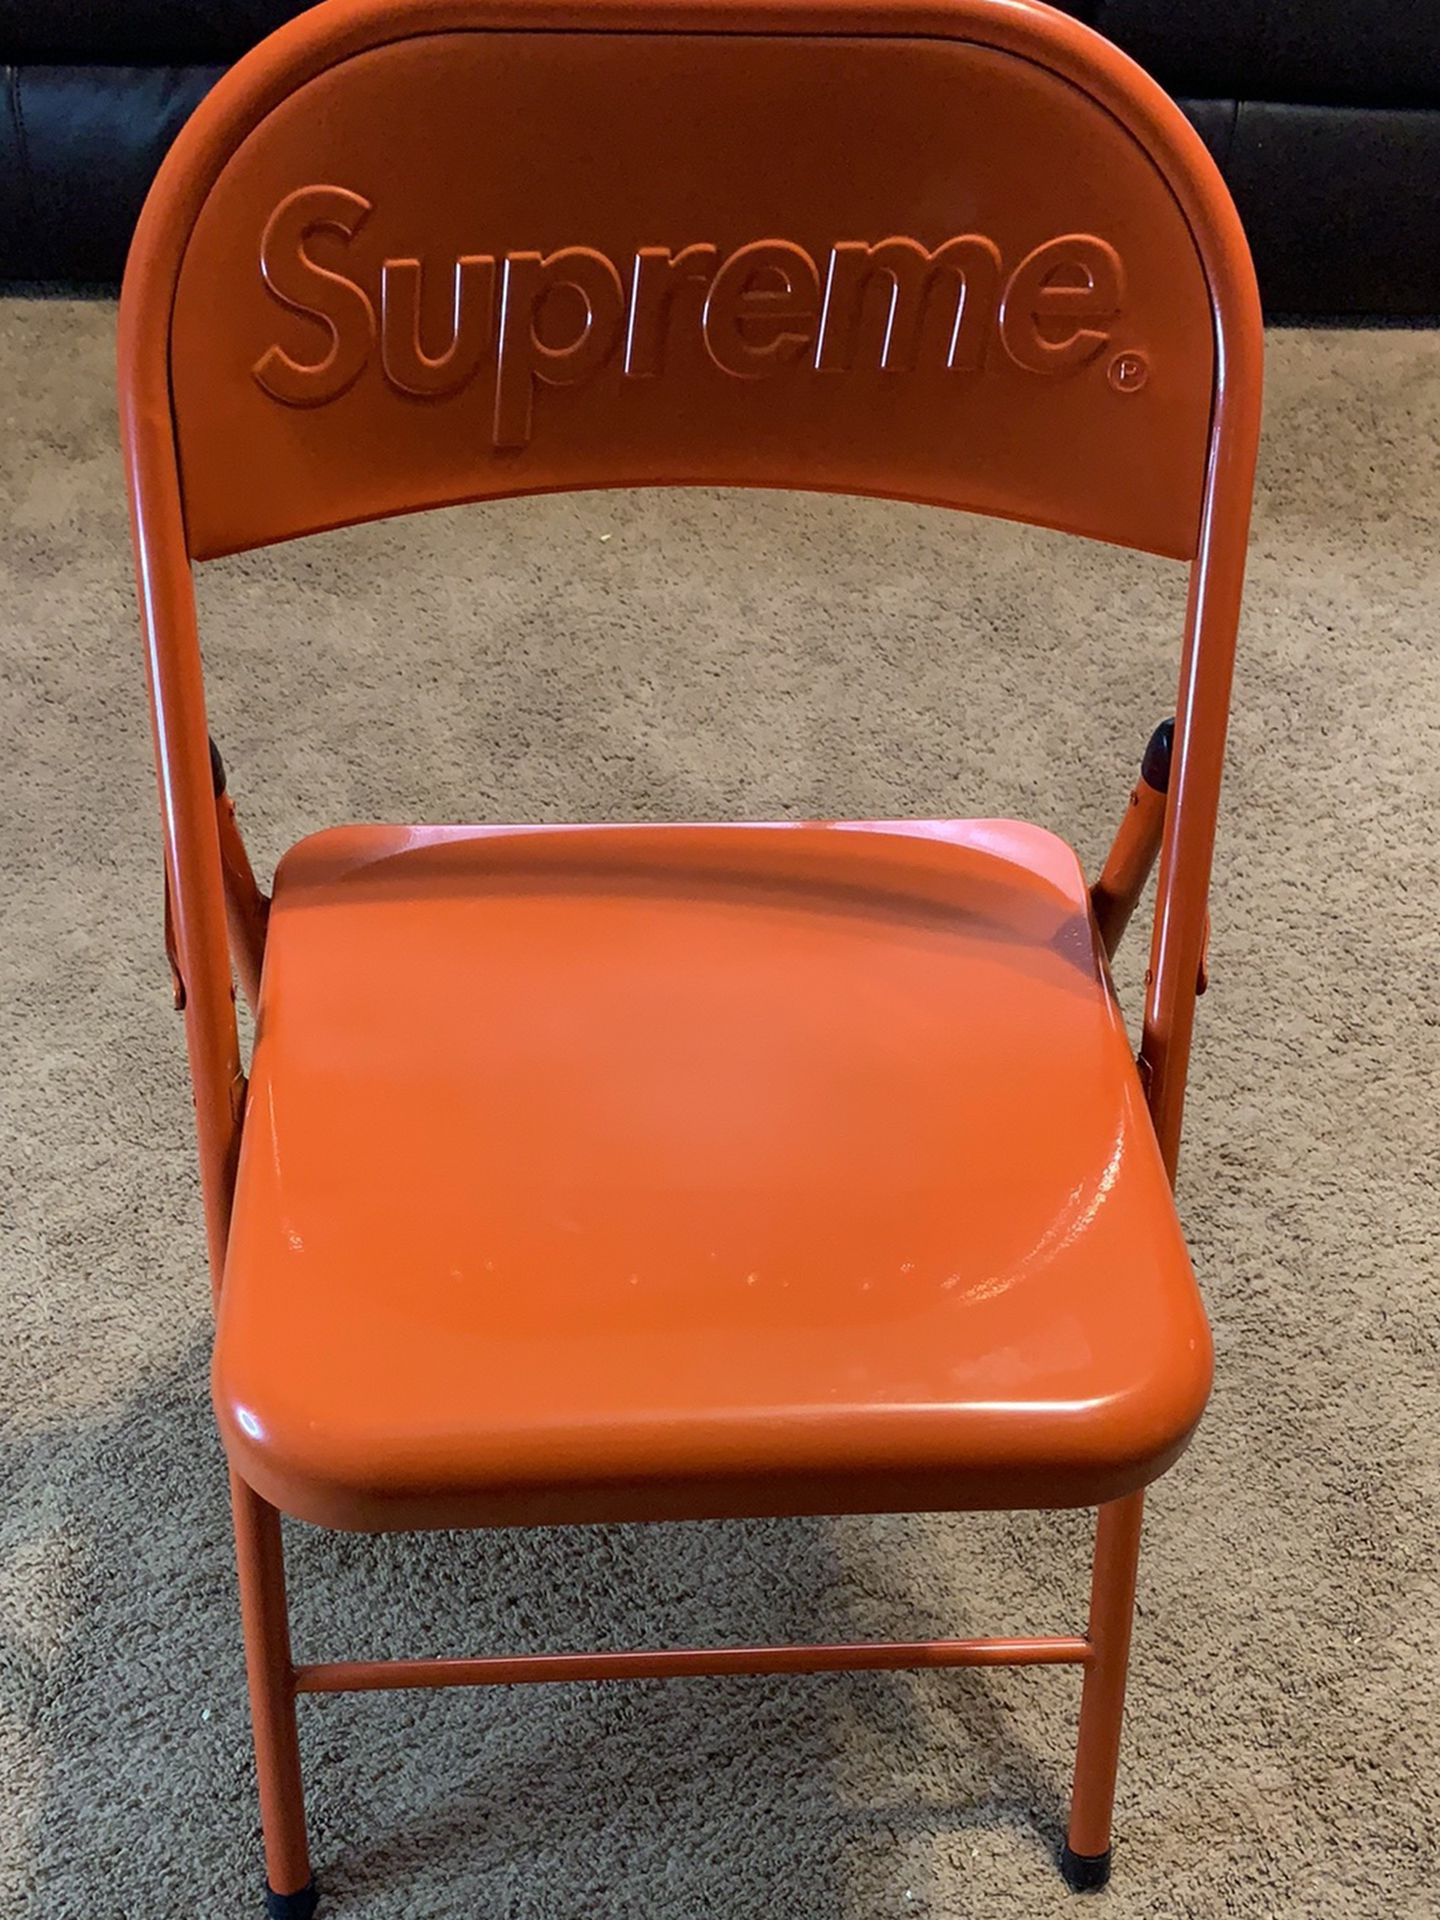 Brand New Supreme Foldable Chair Available Today Only